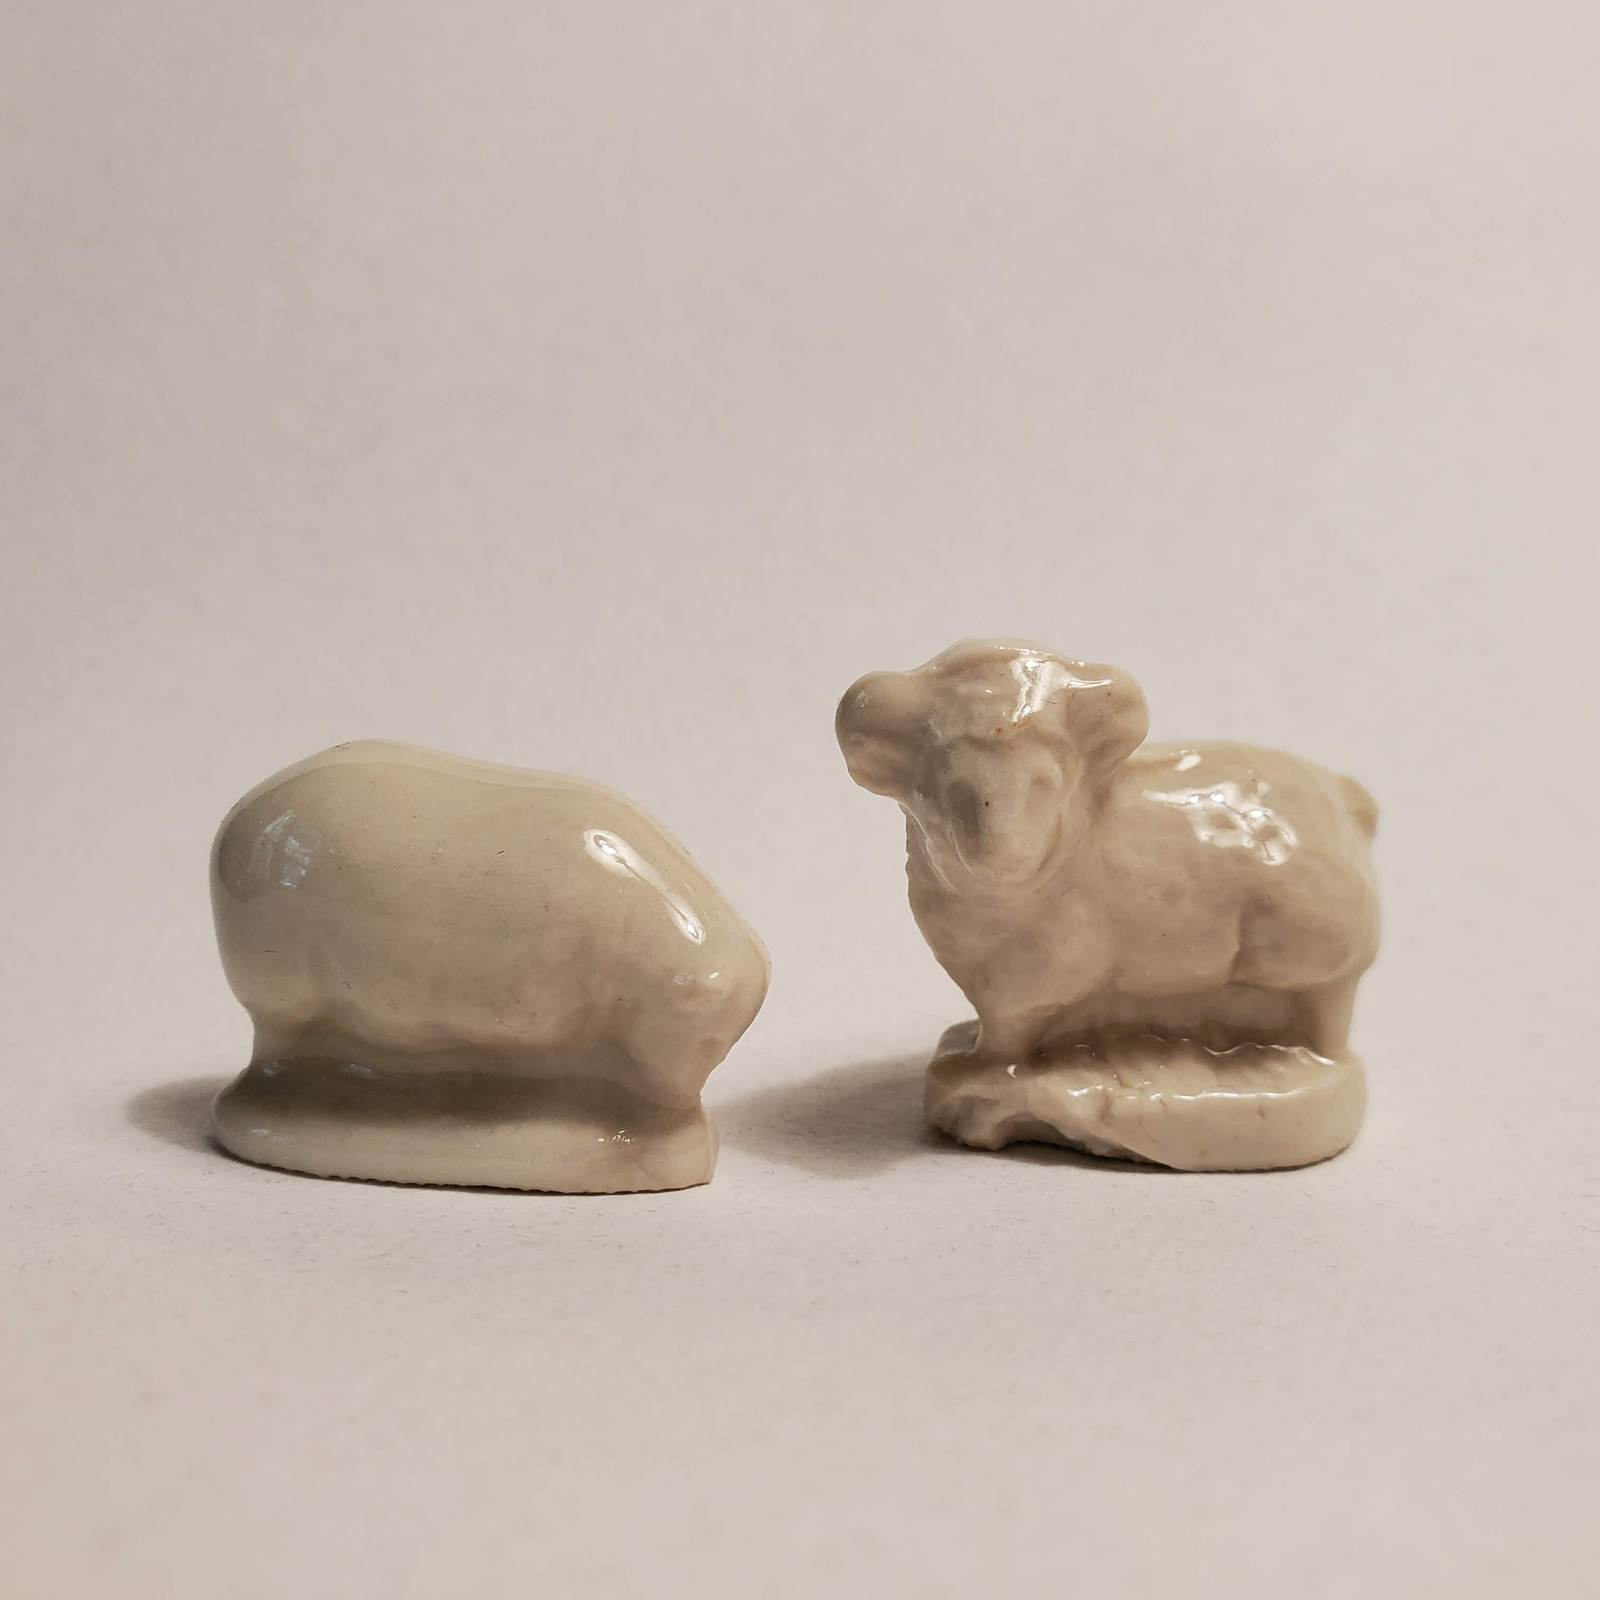 Primary image for Wade Whimsies Sheep Figurines, set of 2, Wade England Collectibles, noahs ark